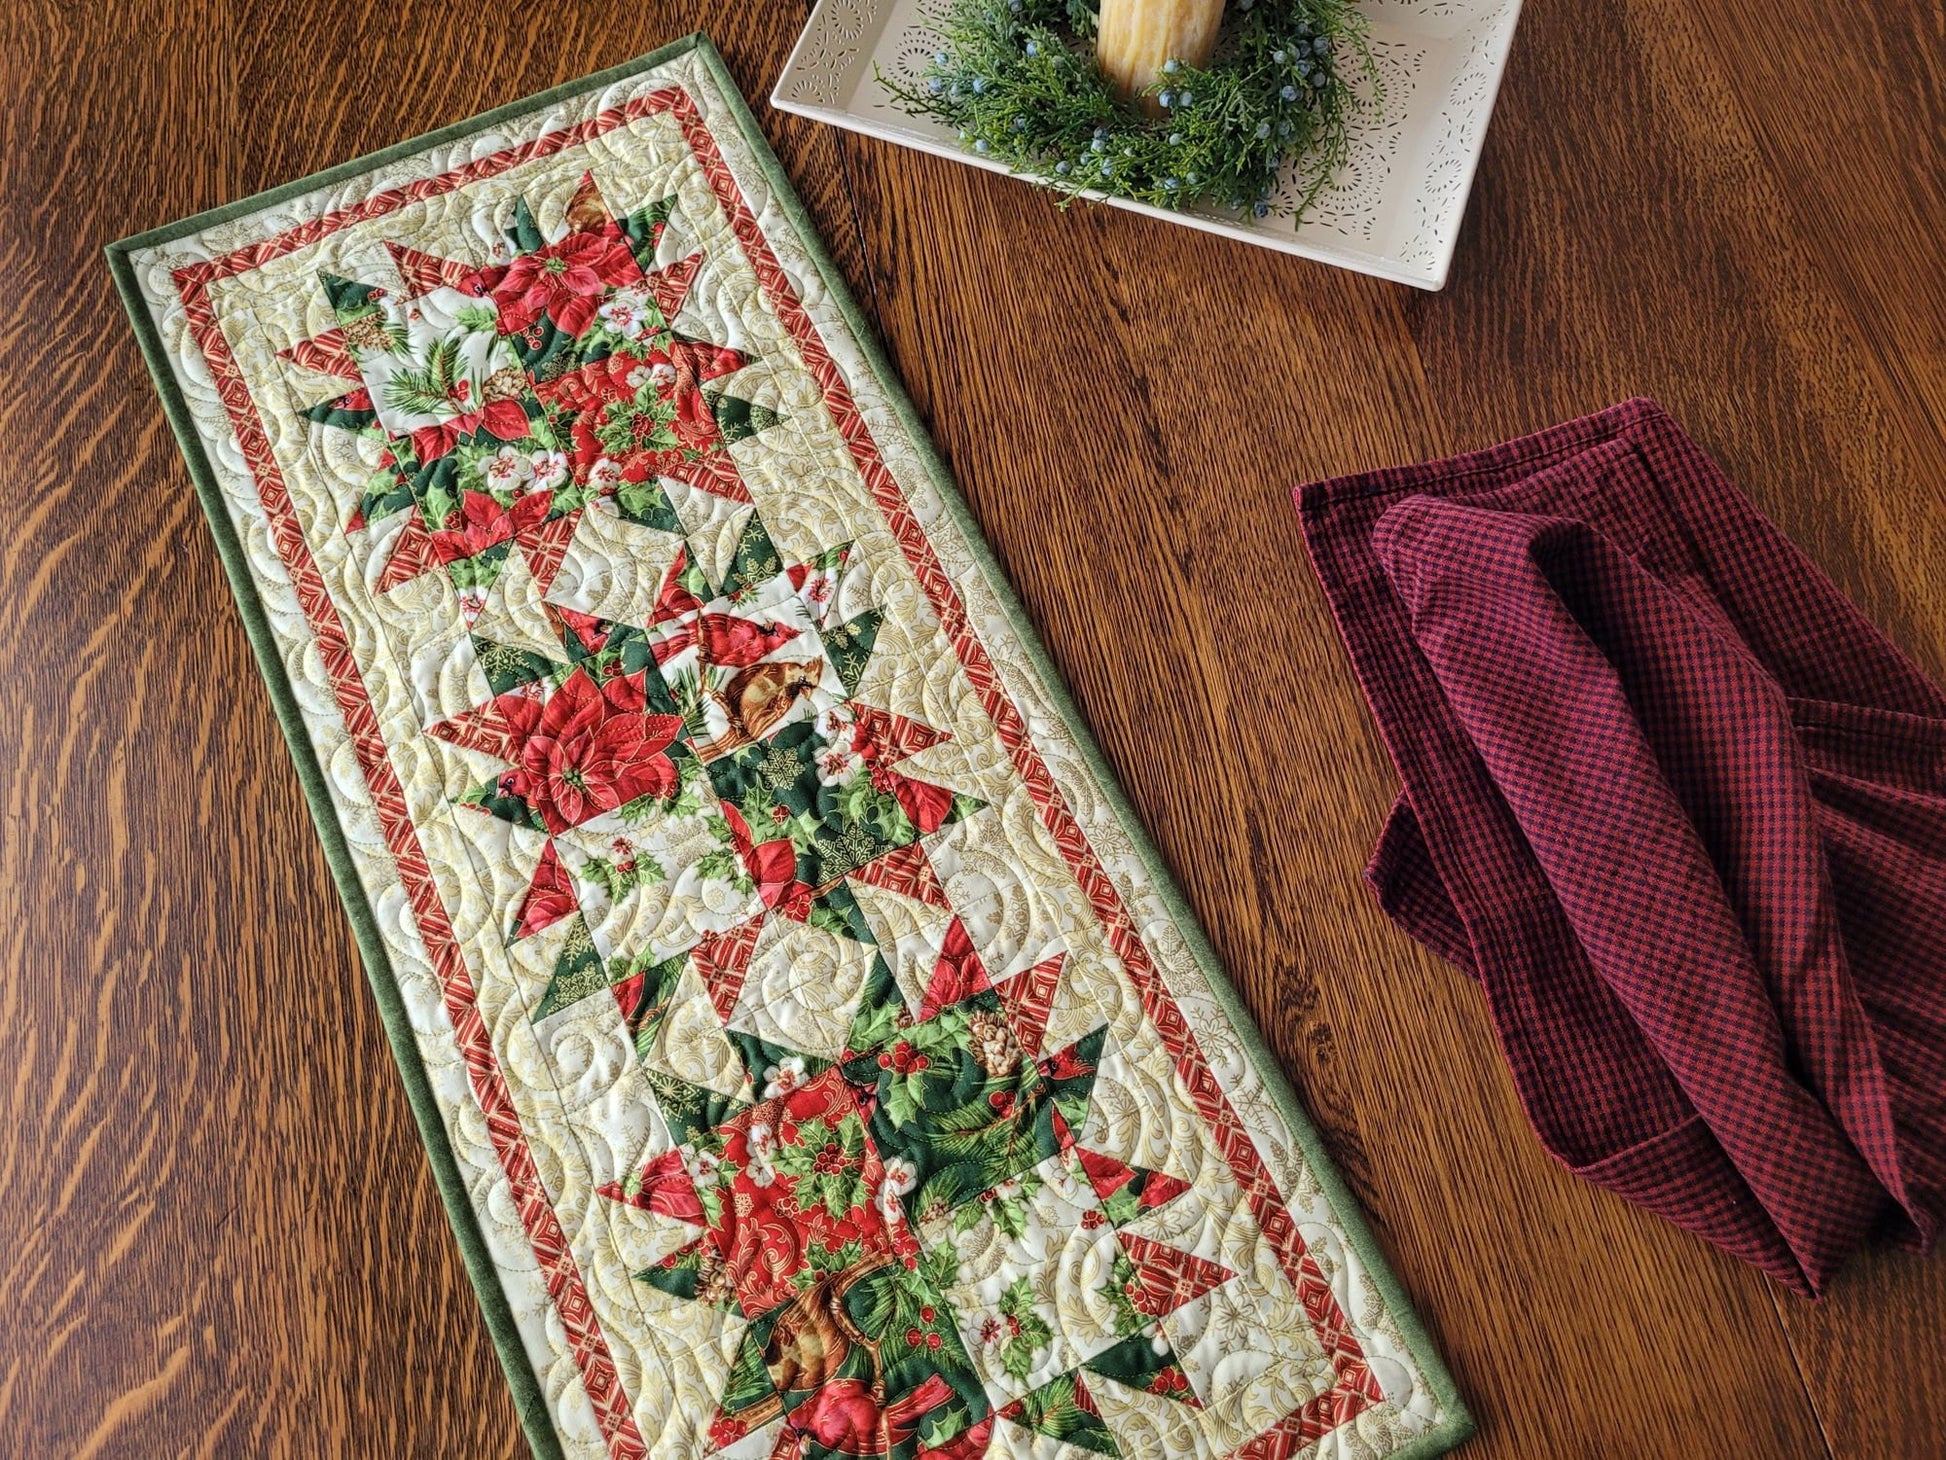 bear paw table runner with poinsettias and cardinals